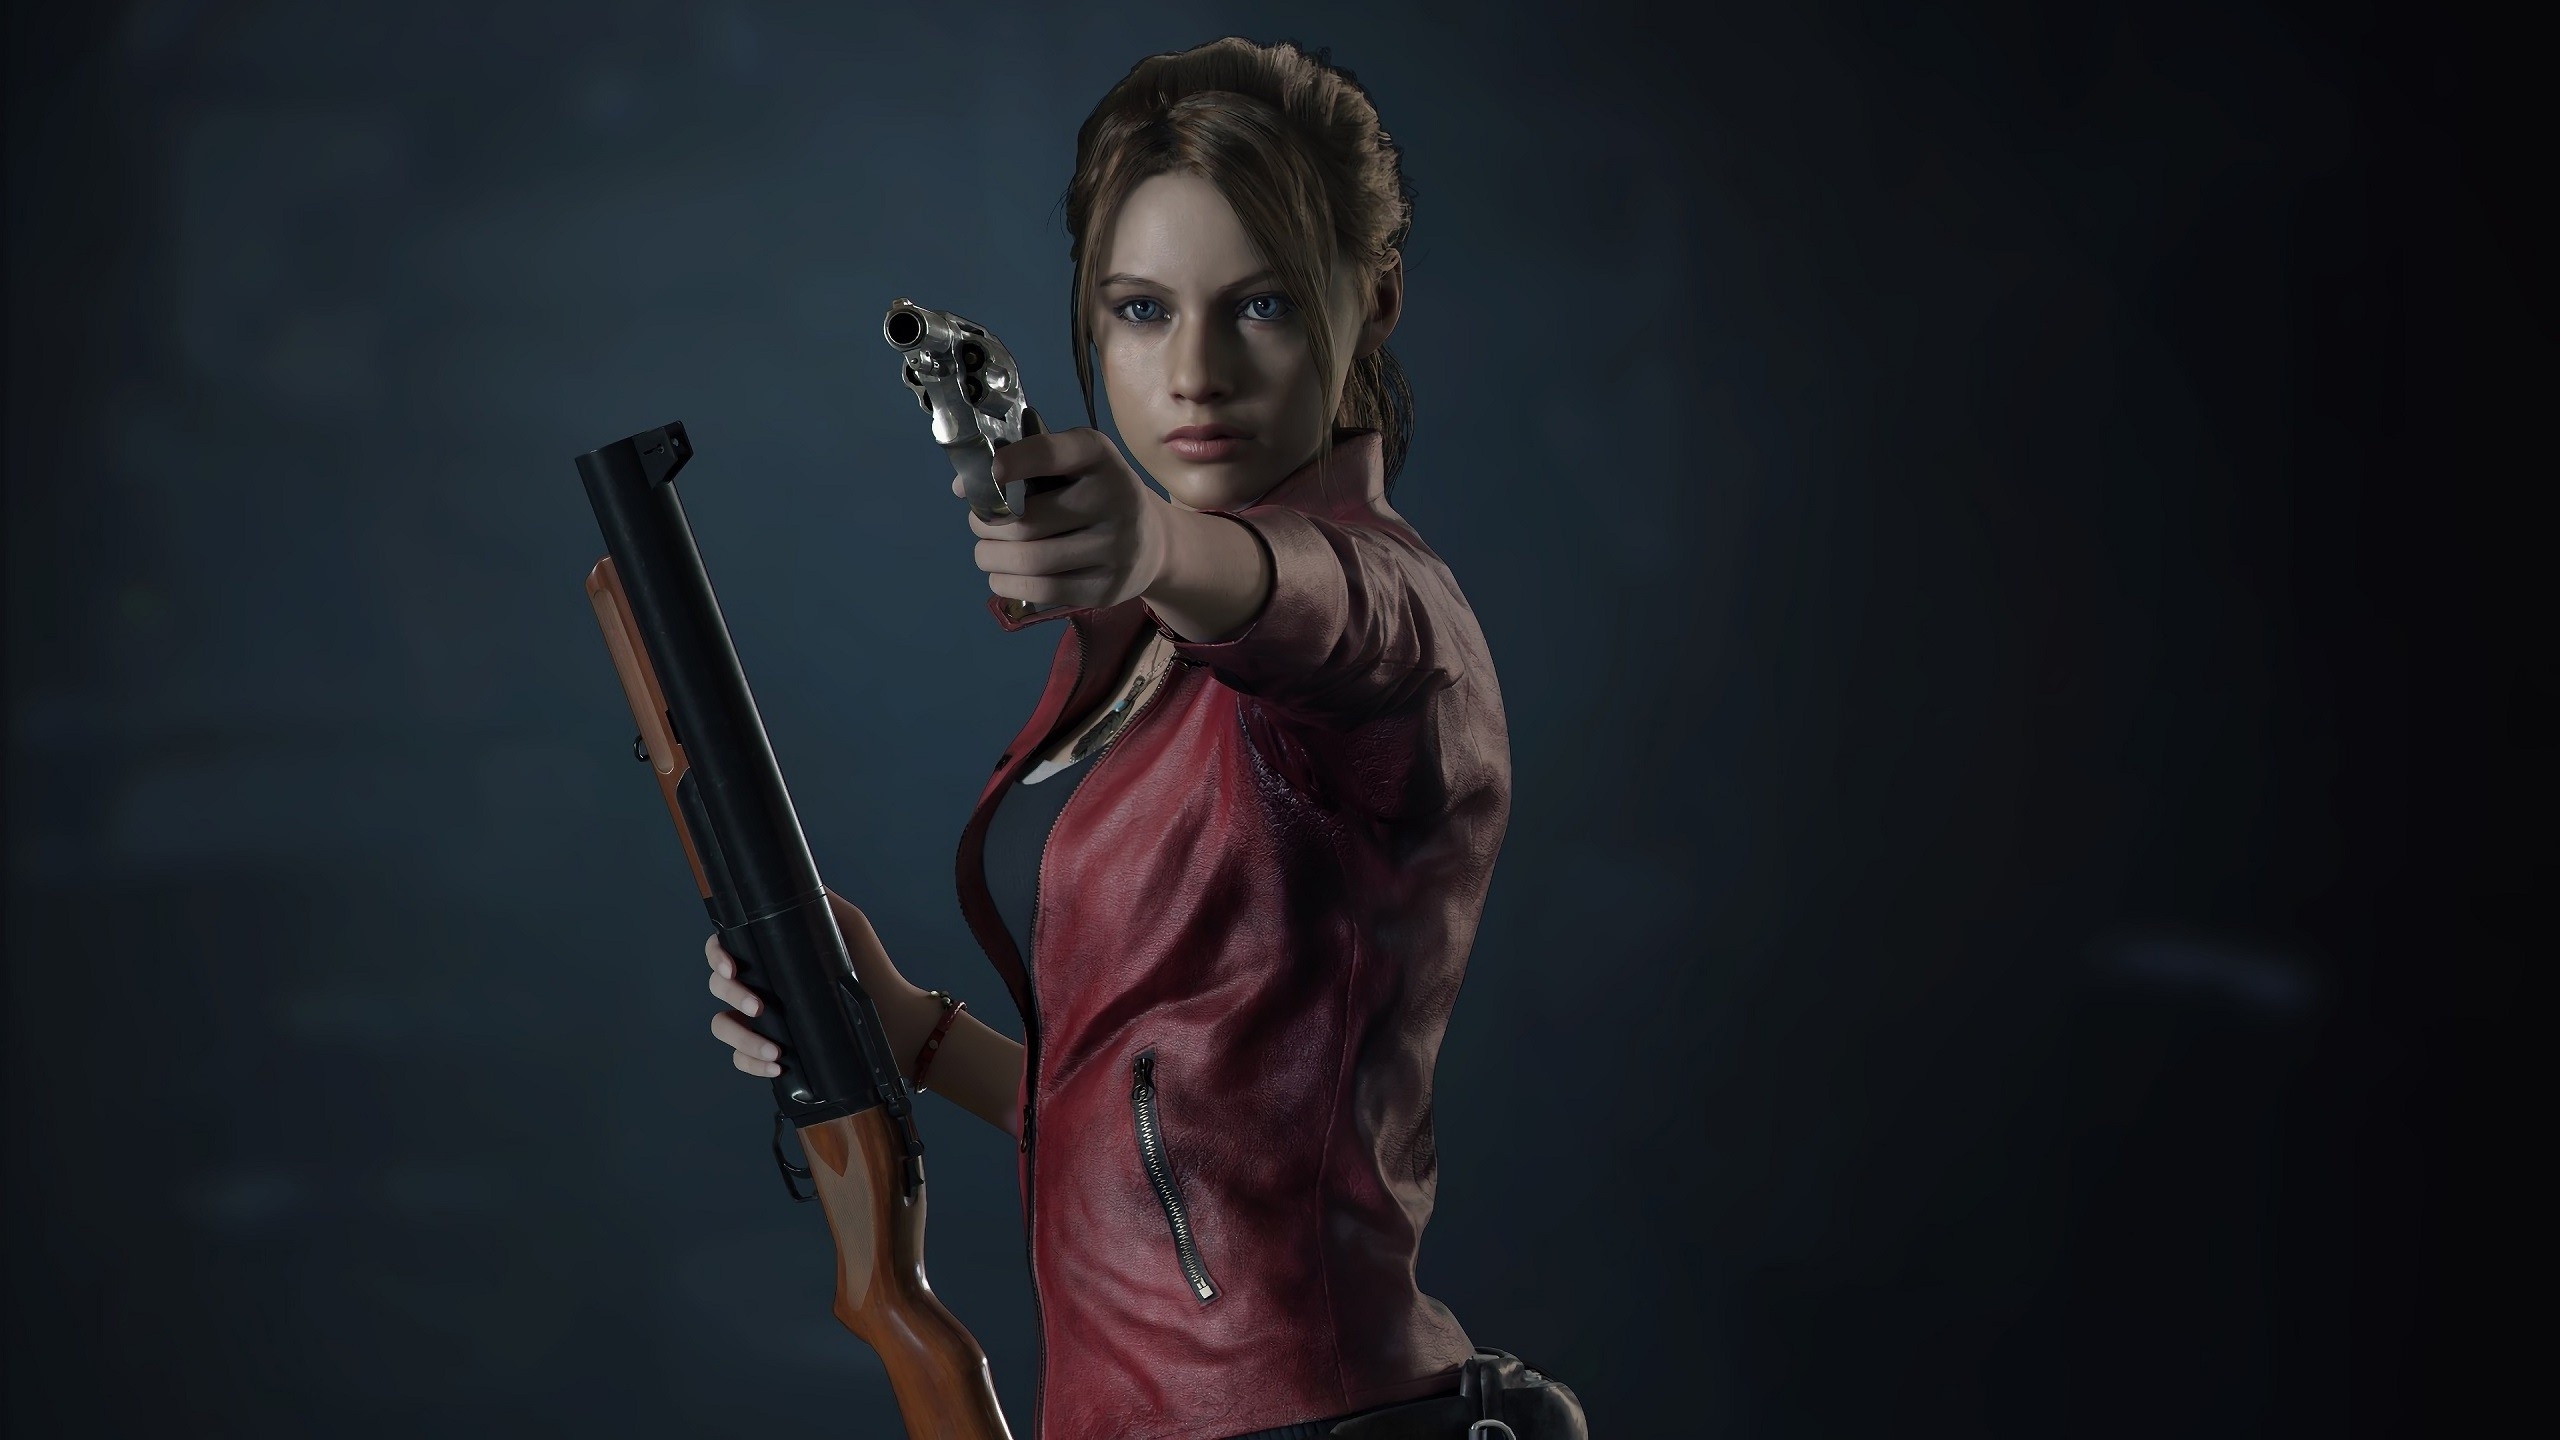 Quadro Claire Redfield Resident Evil 2 Remake 45x35 Gamer